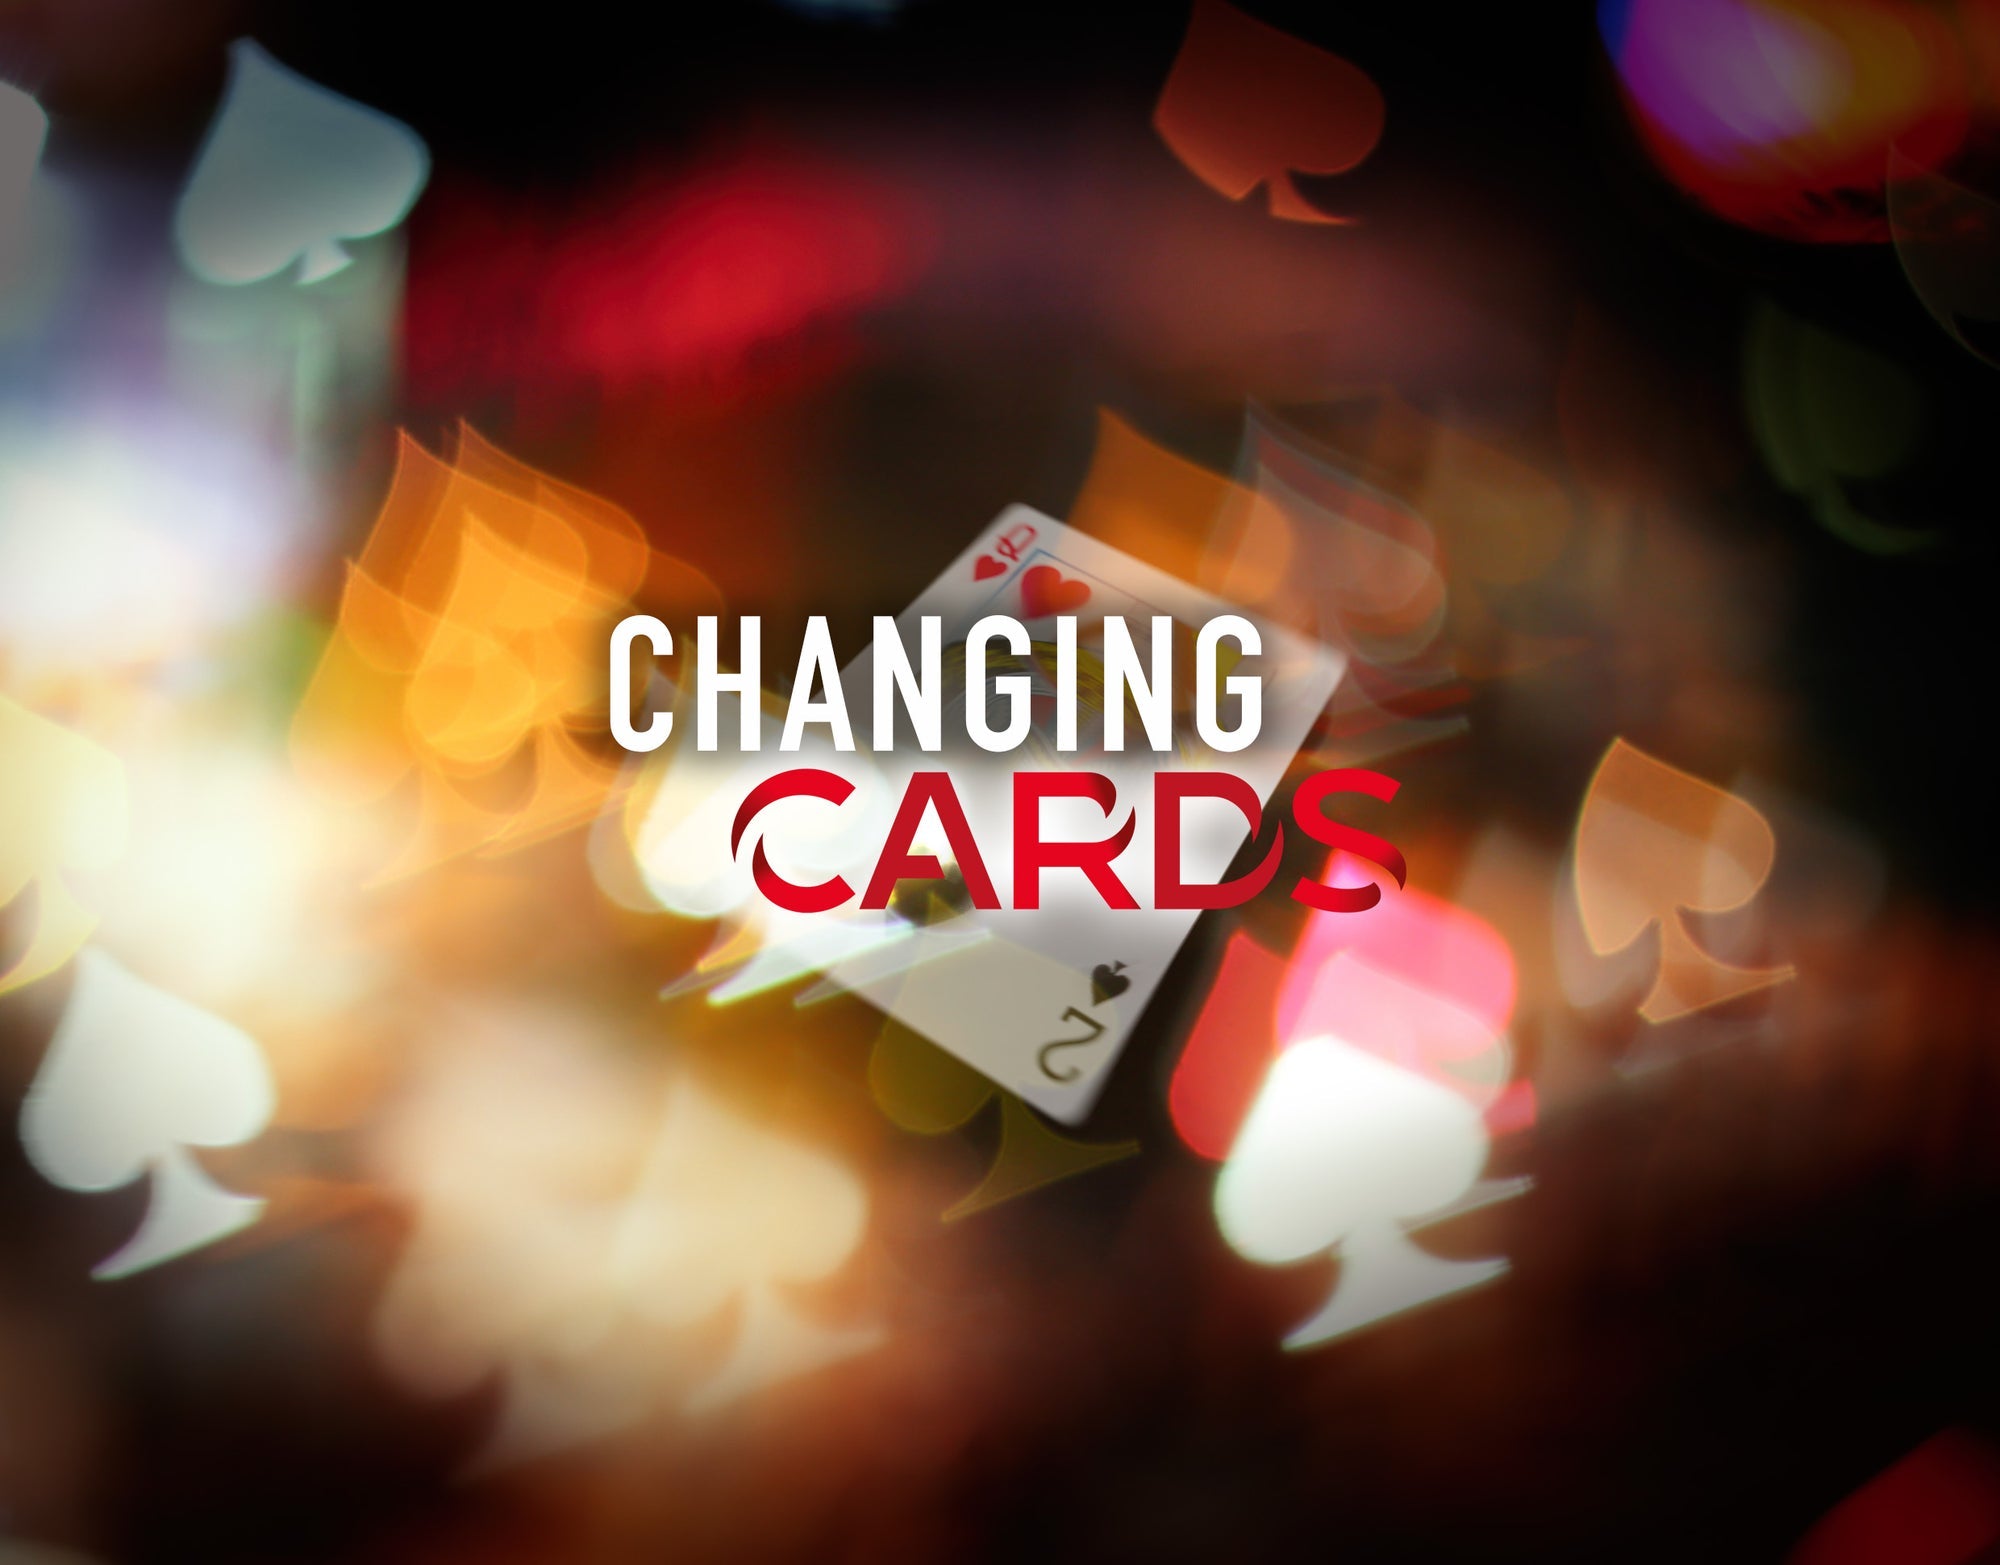 Changing Card by Richard Young and Bob Swadling